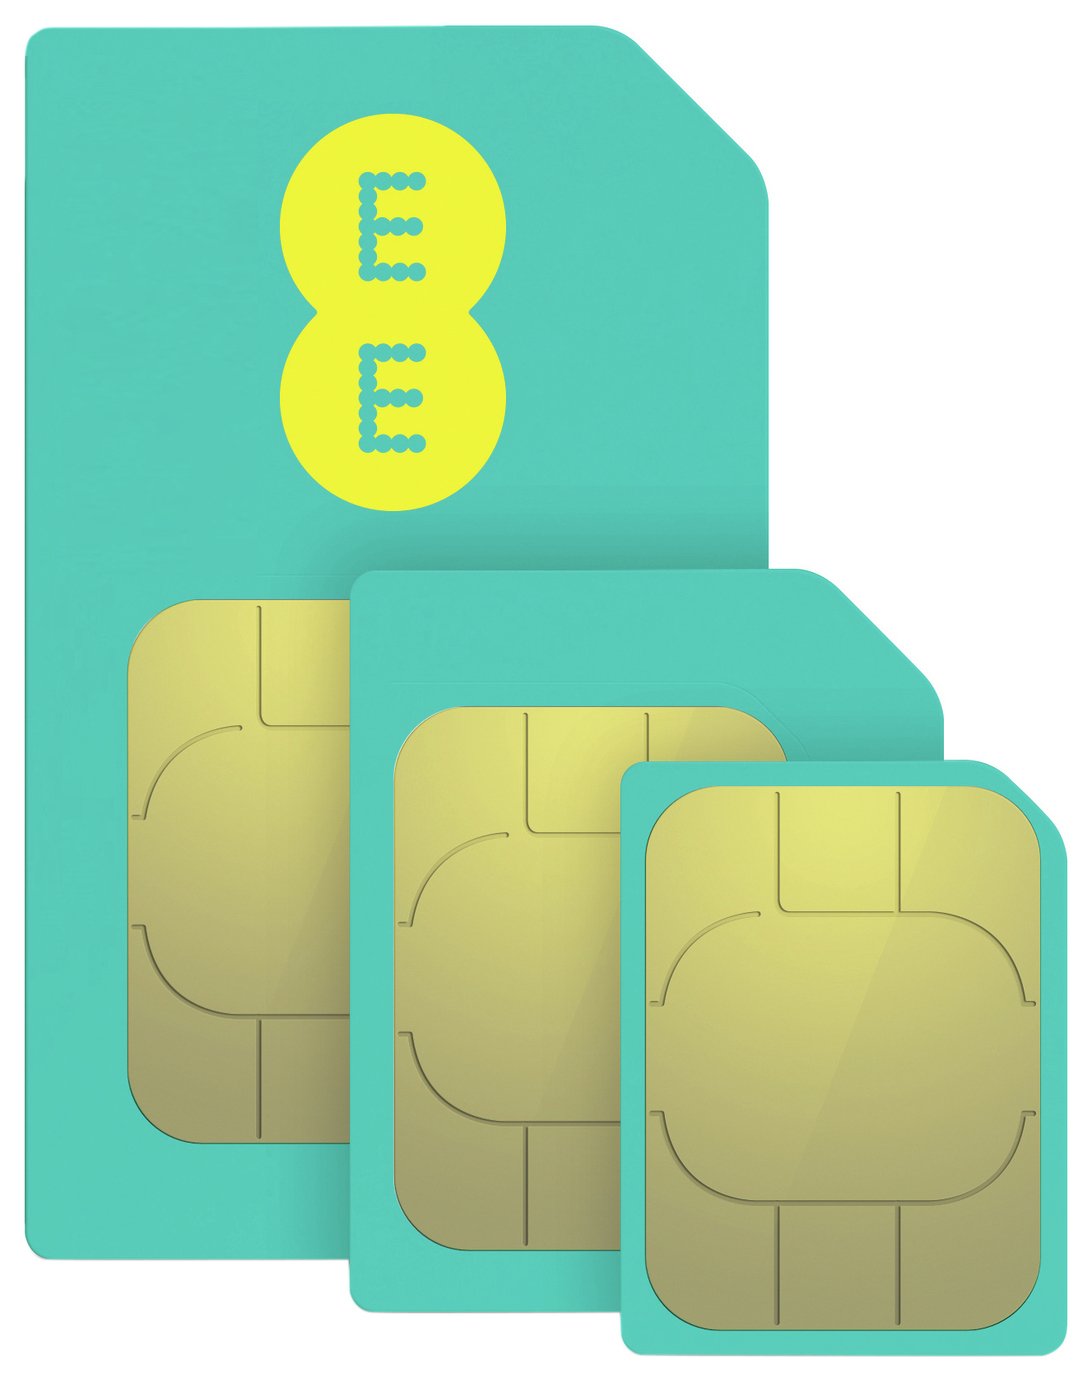 EE 4G 6GB Pay As You Go Mobile Broadband Sim Card